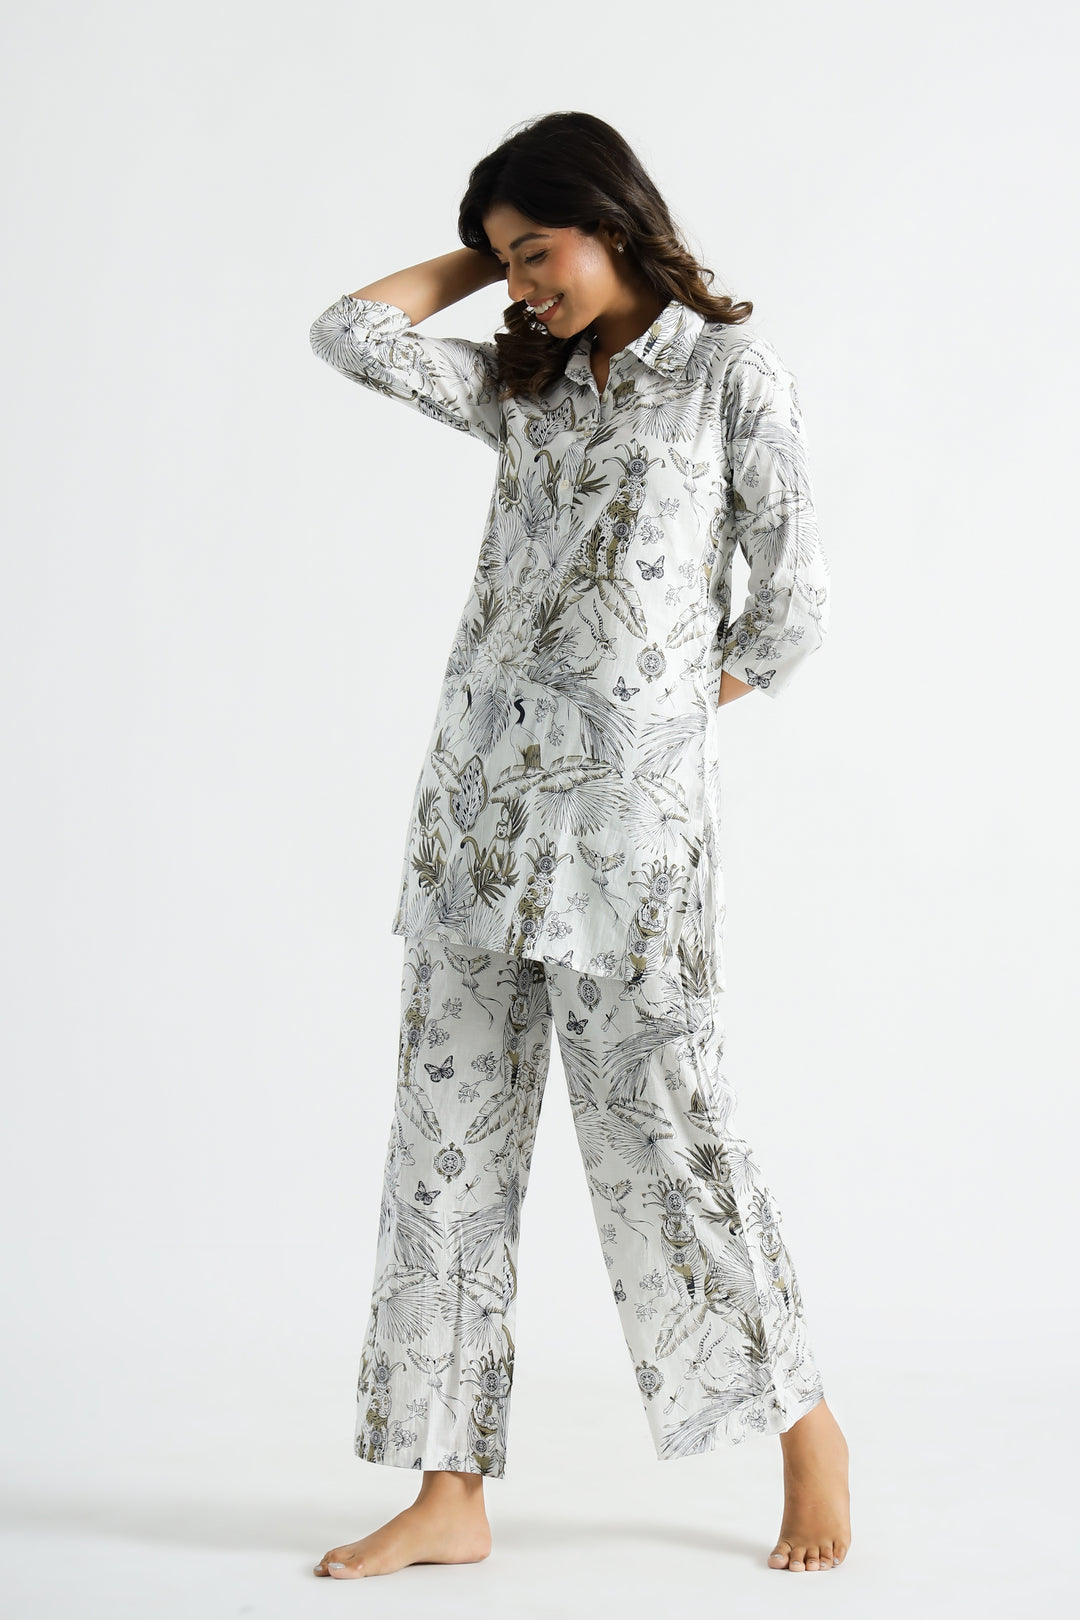 White & Gold Jungle Collared Cotton Lounge Co-Ord Set with 3 button